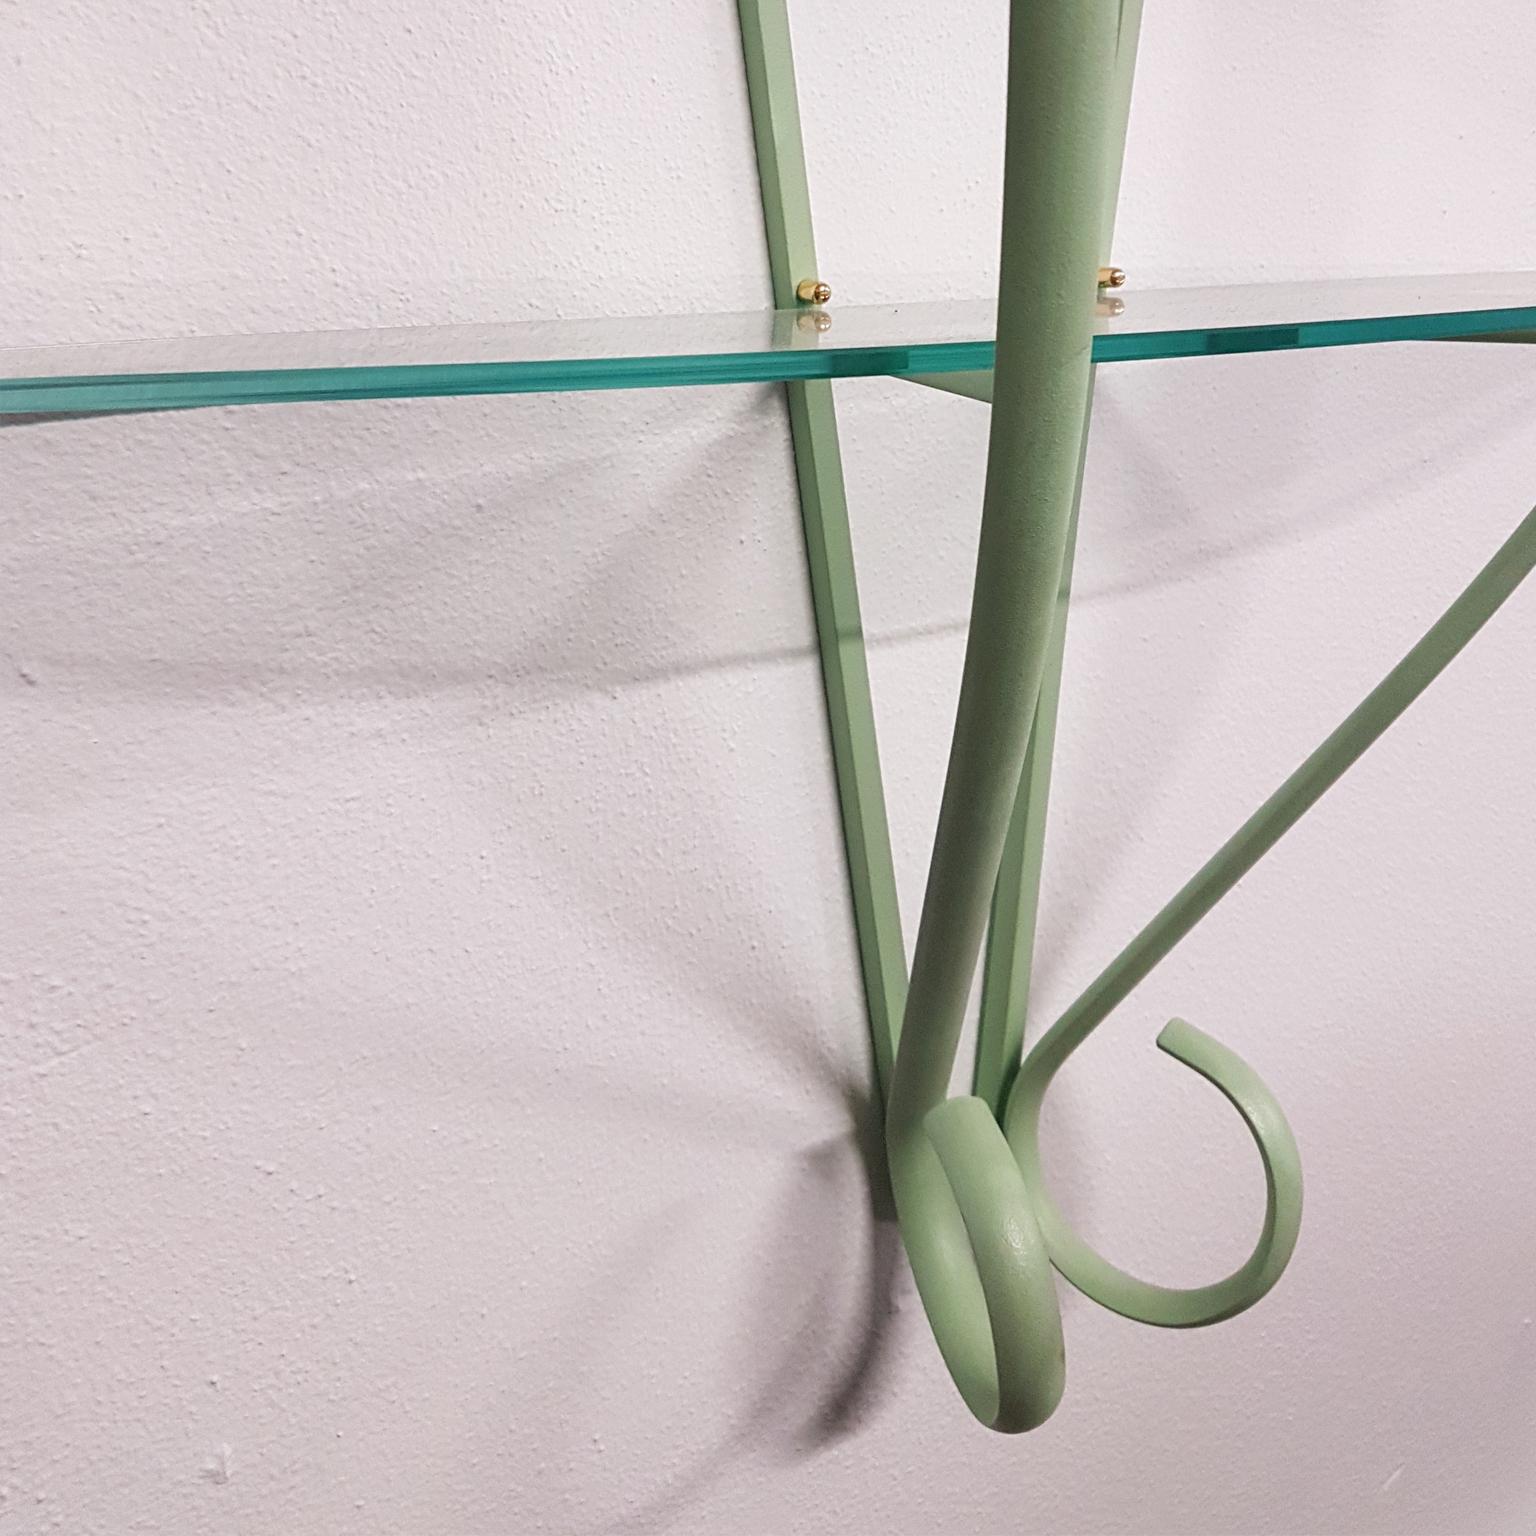 20th Century Italian Zanotta Green Steel Wall Decoration with Glass Shelves, Limited Edition For Sale